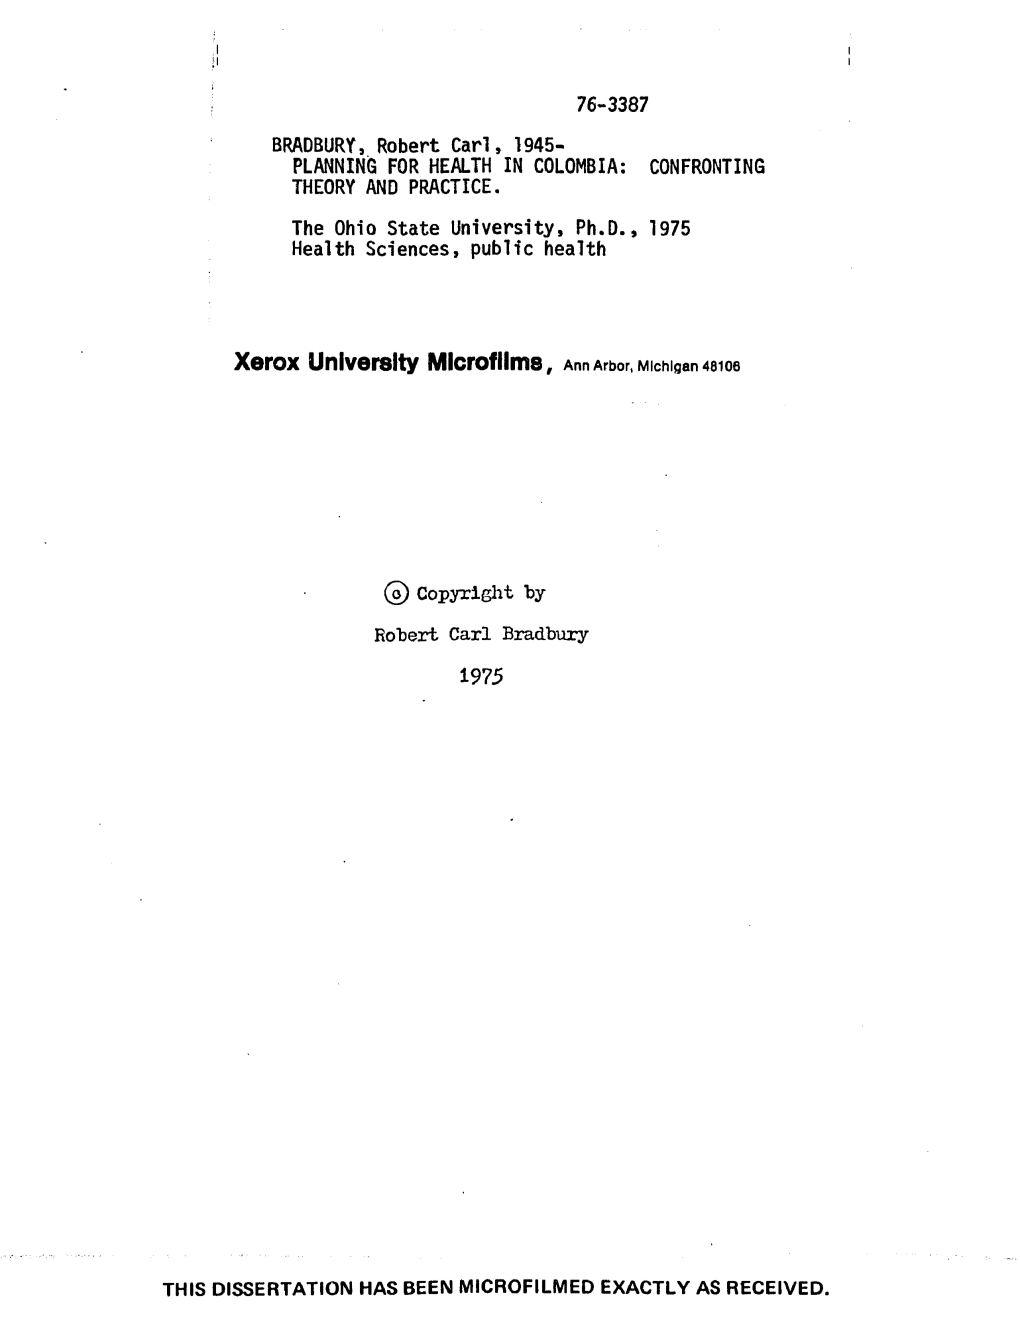 CONFRONTING THEORY and PRACTICE. the Ohio State University, Ph.D., 1975 Health Sciences, Public Health